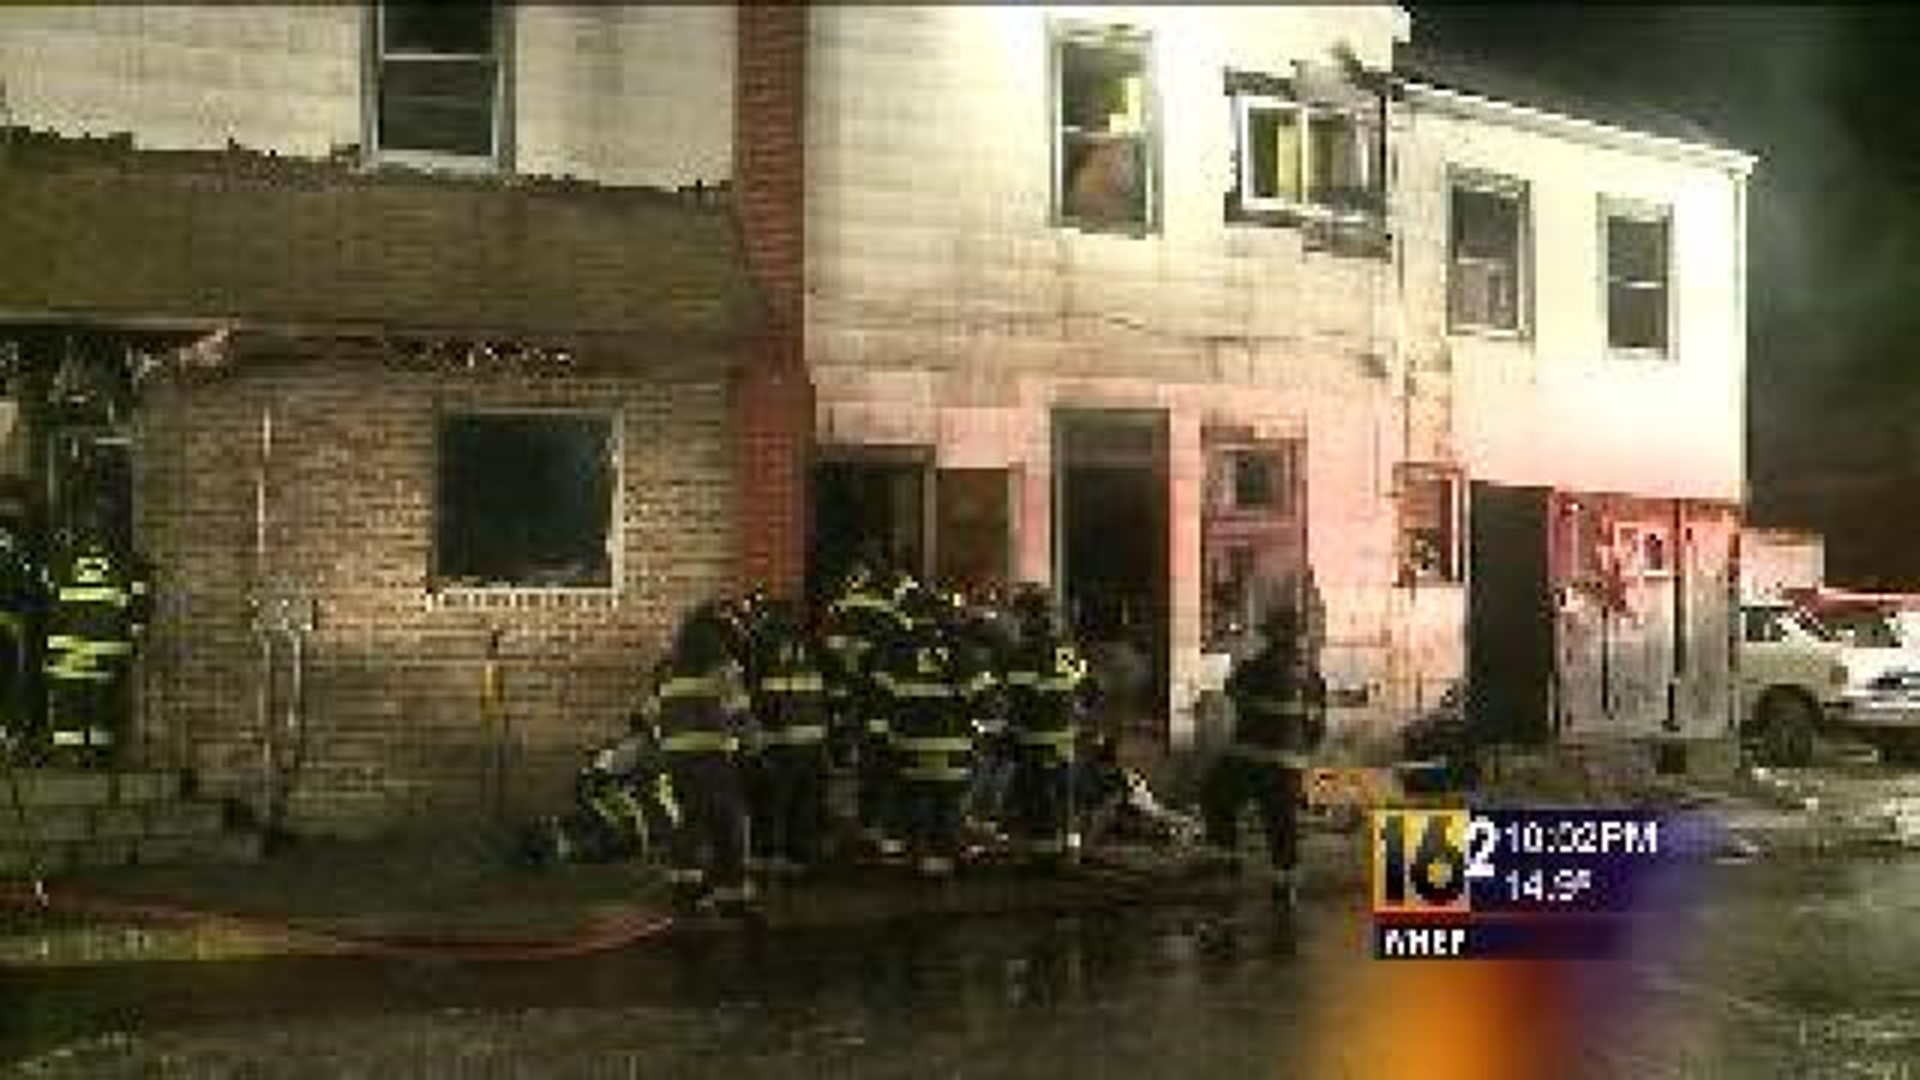 Shamokin Residents Concerned After Two Fires in One Day